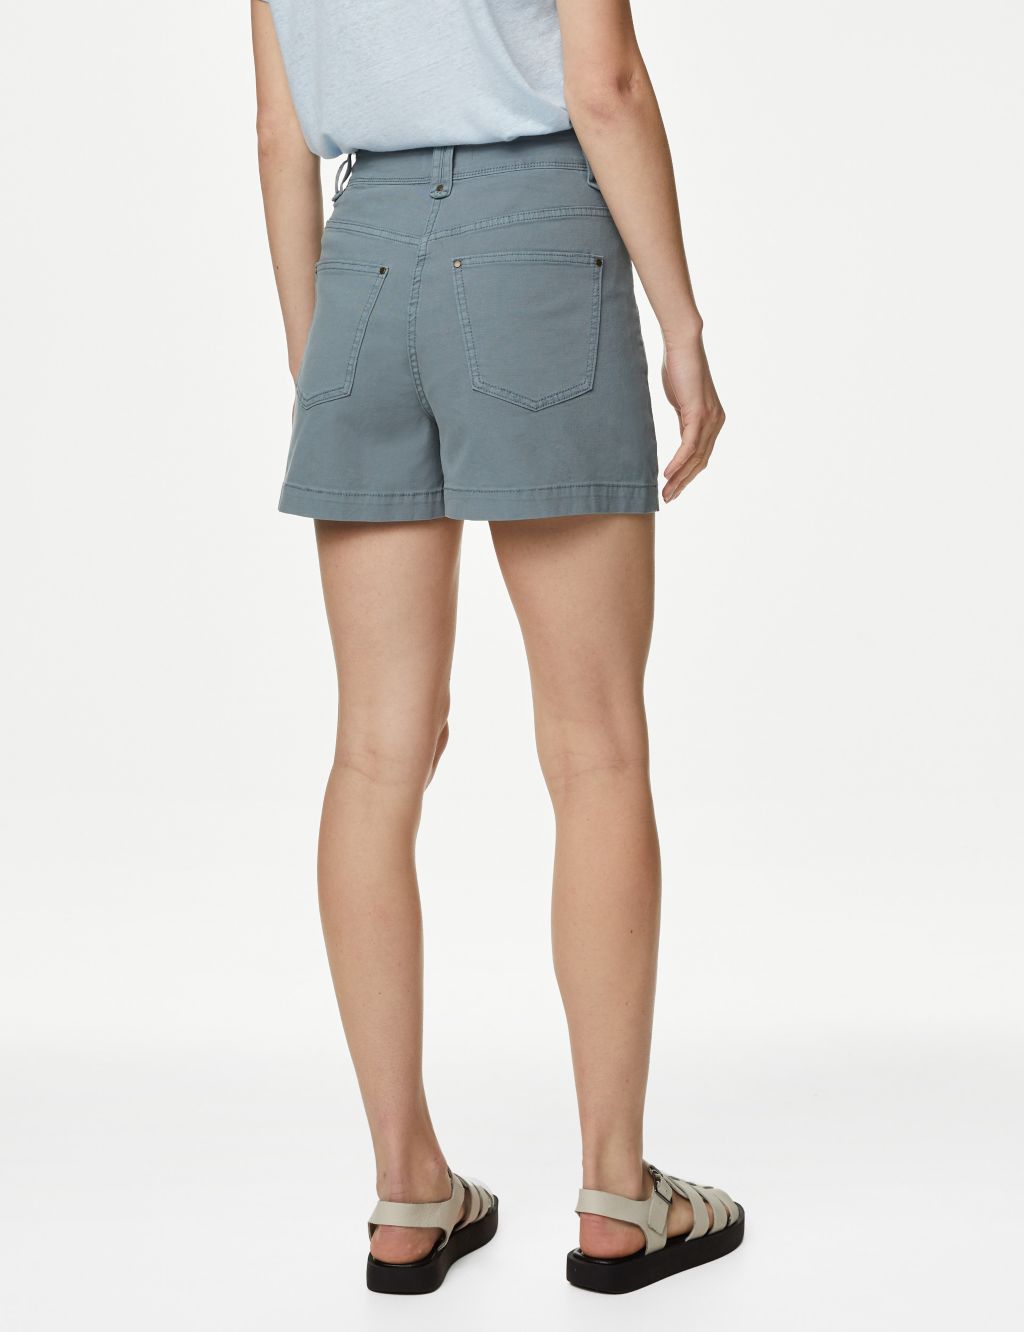 Cotton Rich High Waisted Utility Shorts image 4